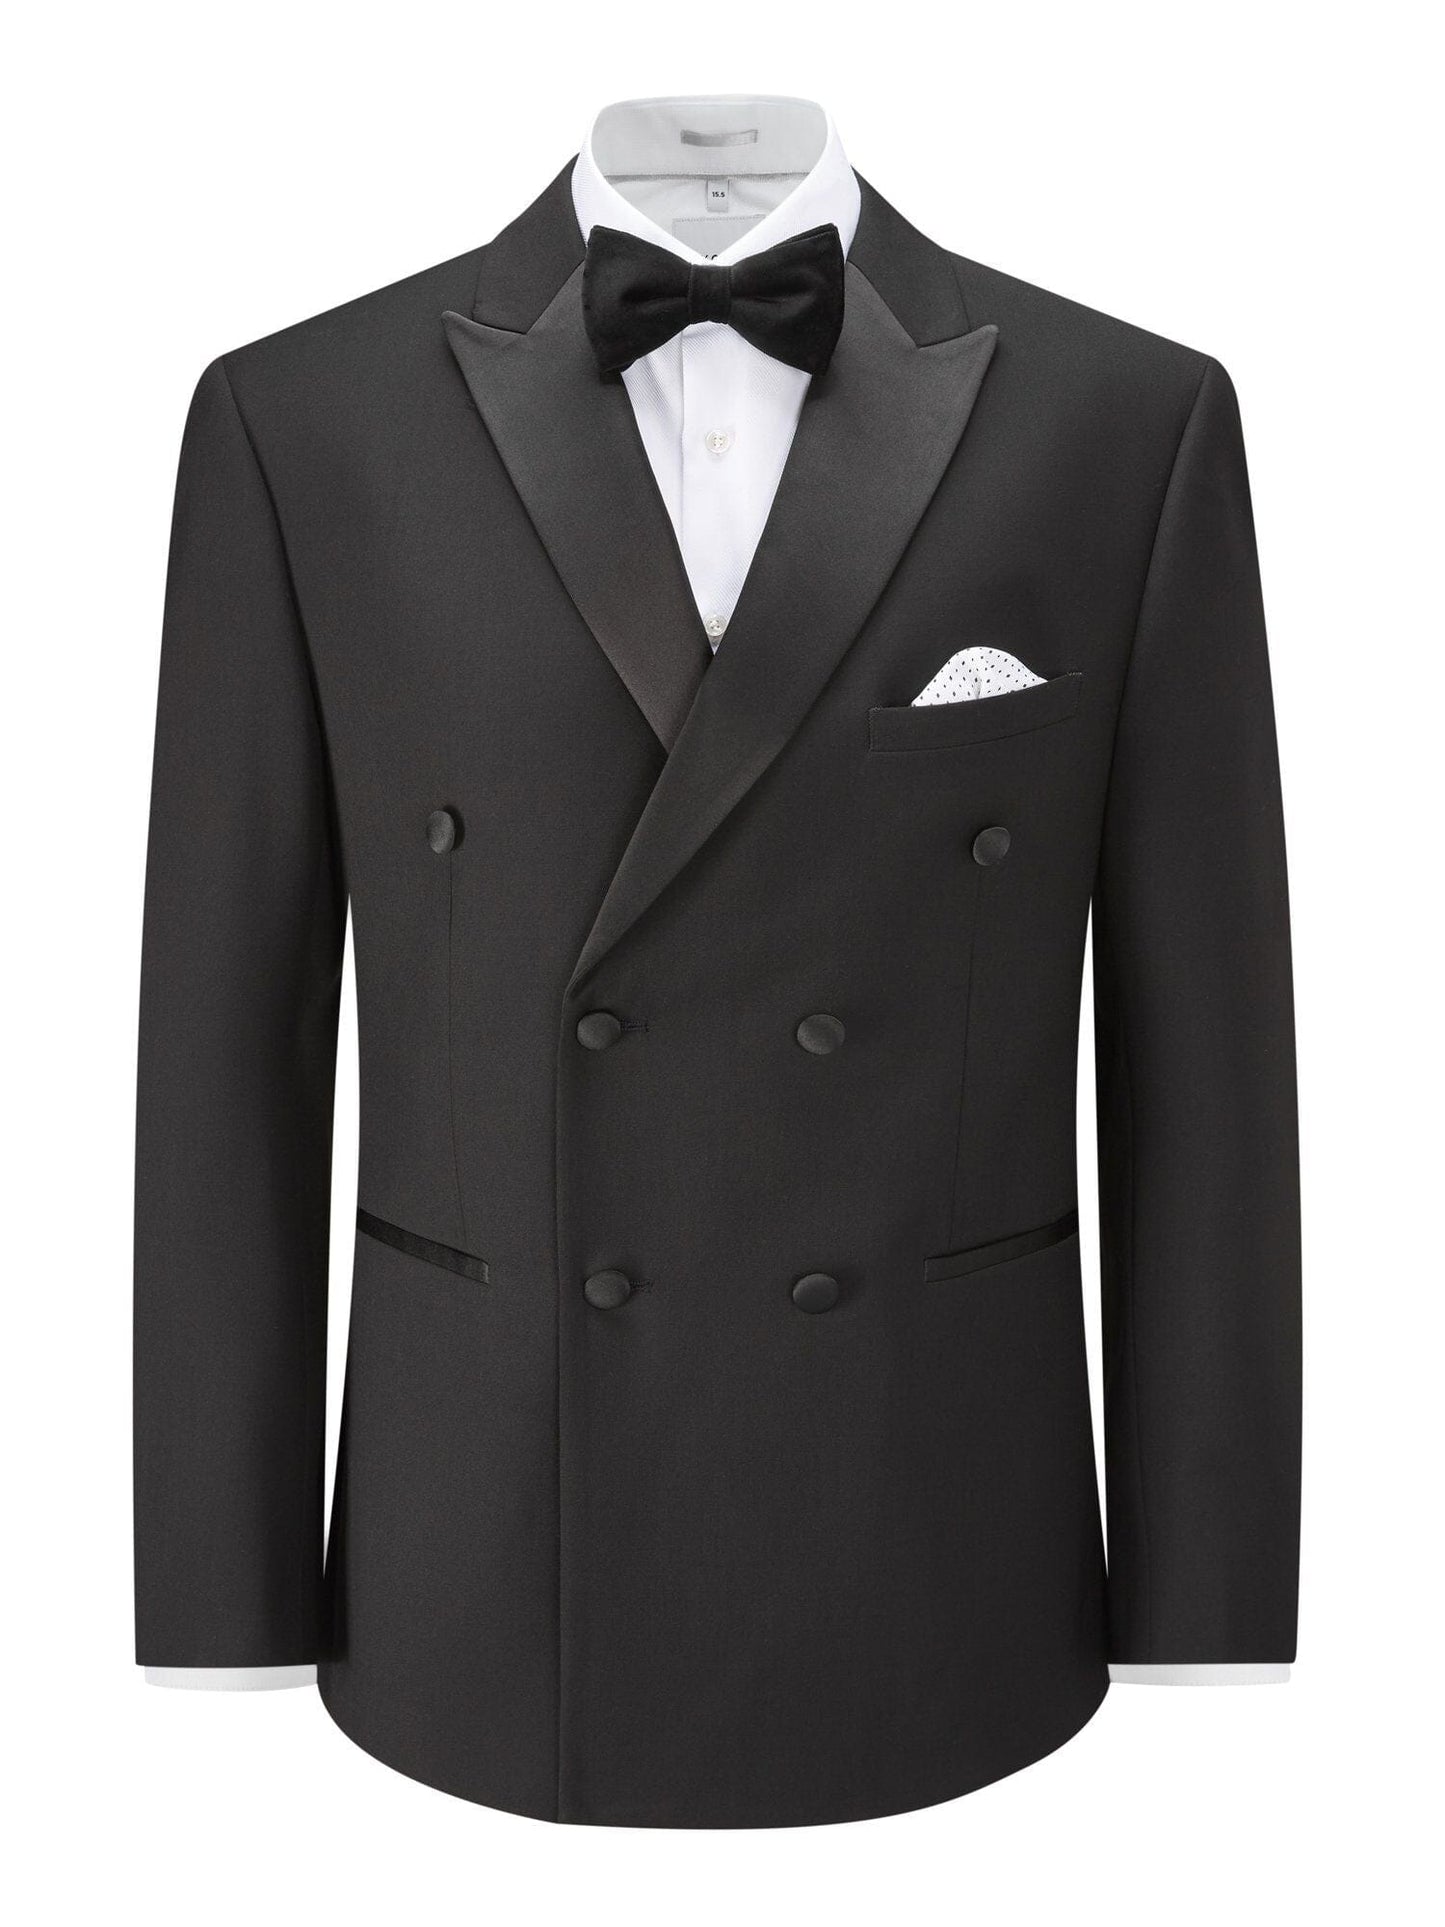 Sinatra Double Breasted Black Dinner Jacket - STOCK CLEARANCE - Blazers & Jackets Sale - 